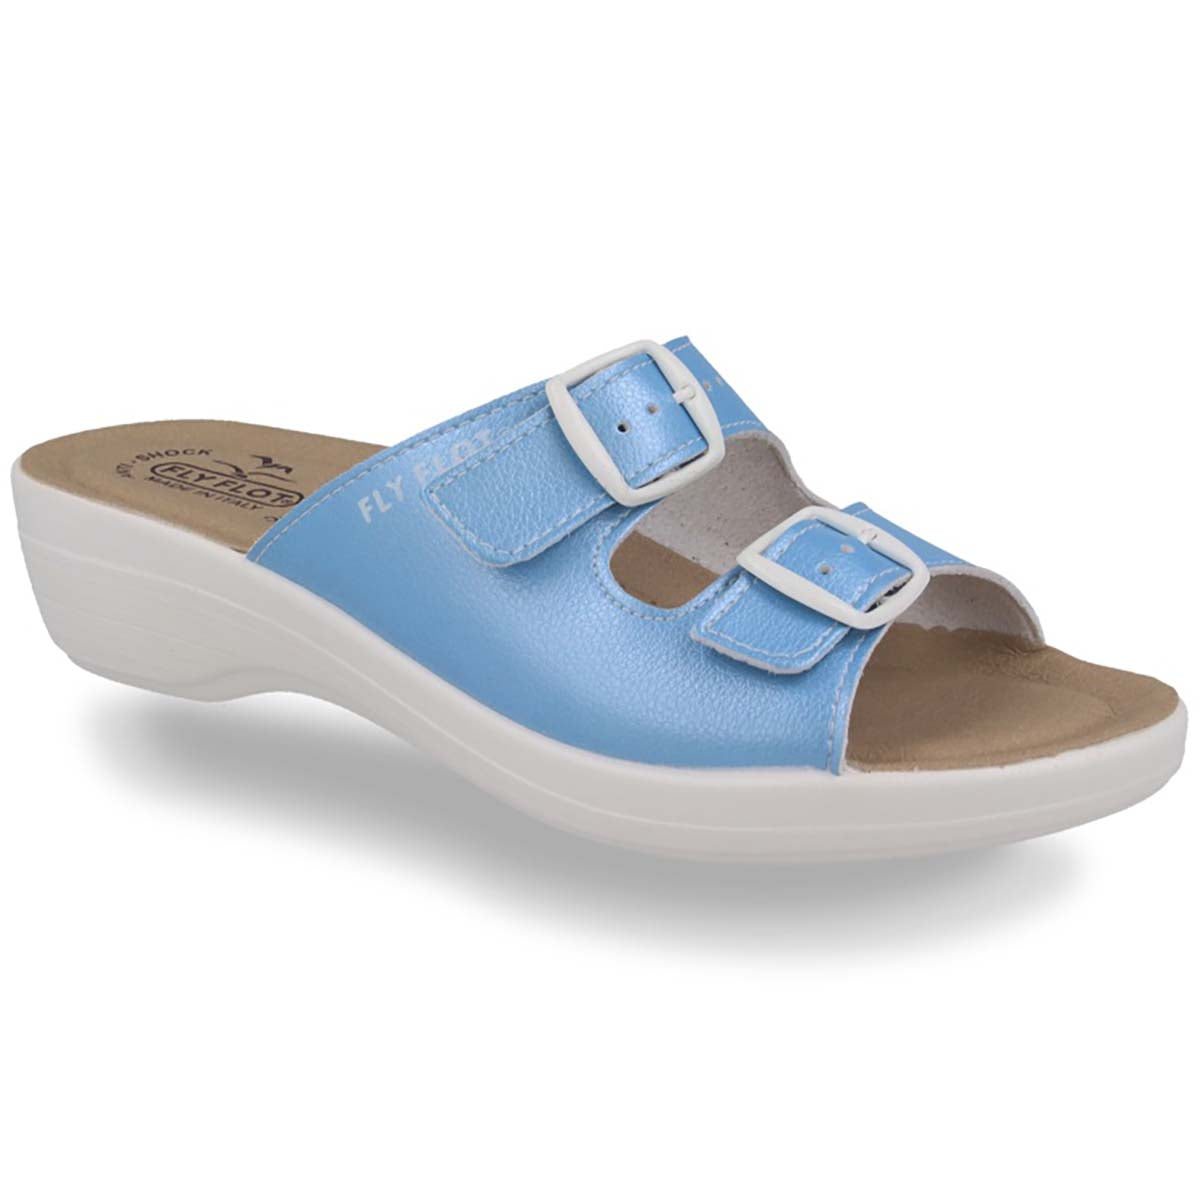 See photos Synthetic Woman Slipper Light Blue (T5C24JB)